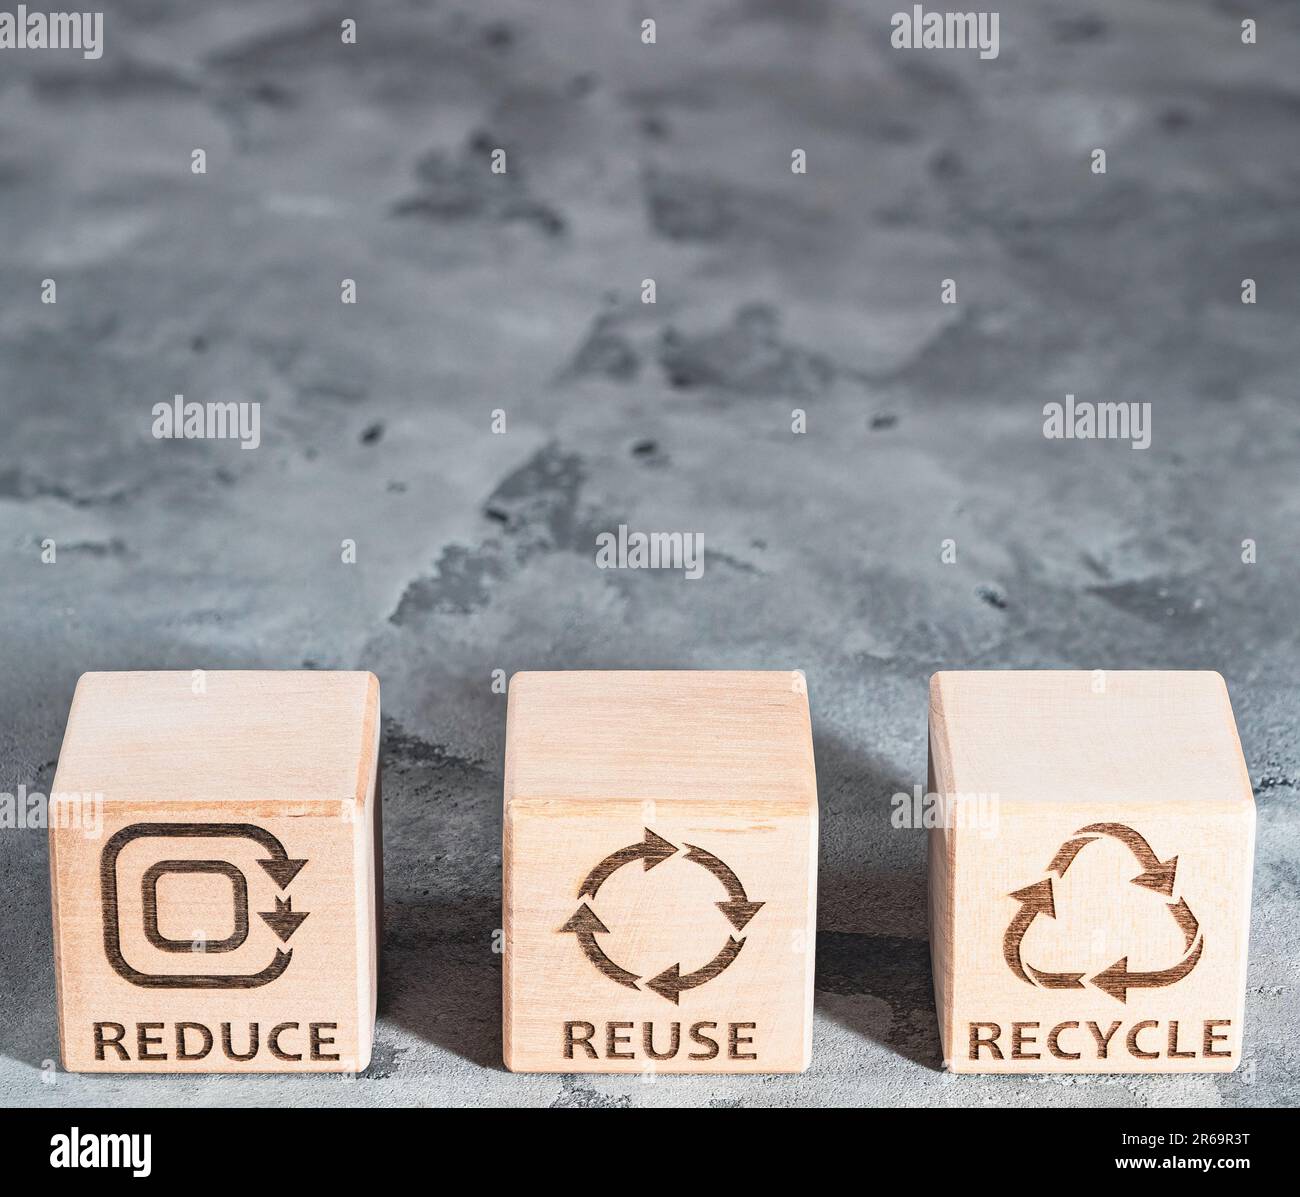 Reduce, Reuse, and Recycle concept symbols Stock Photo